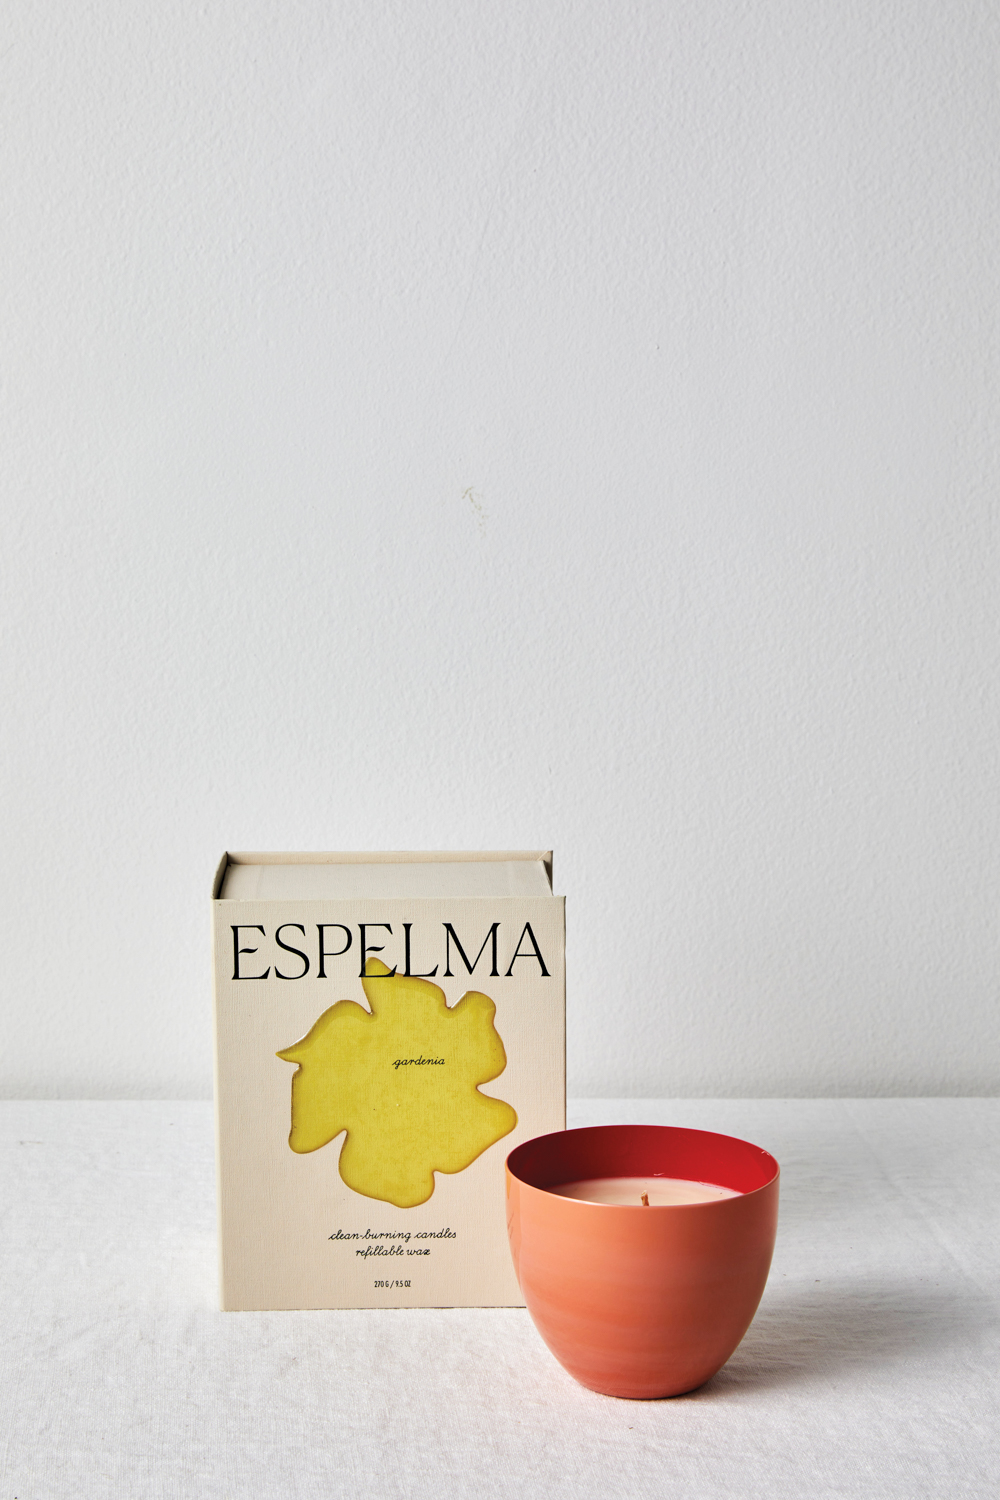 espelma candles in hand-blown glass